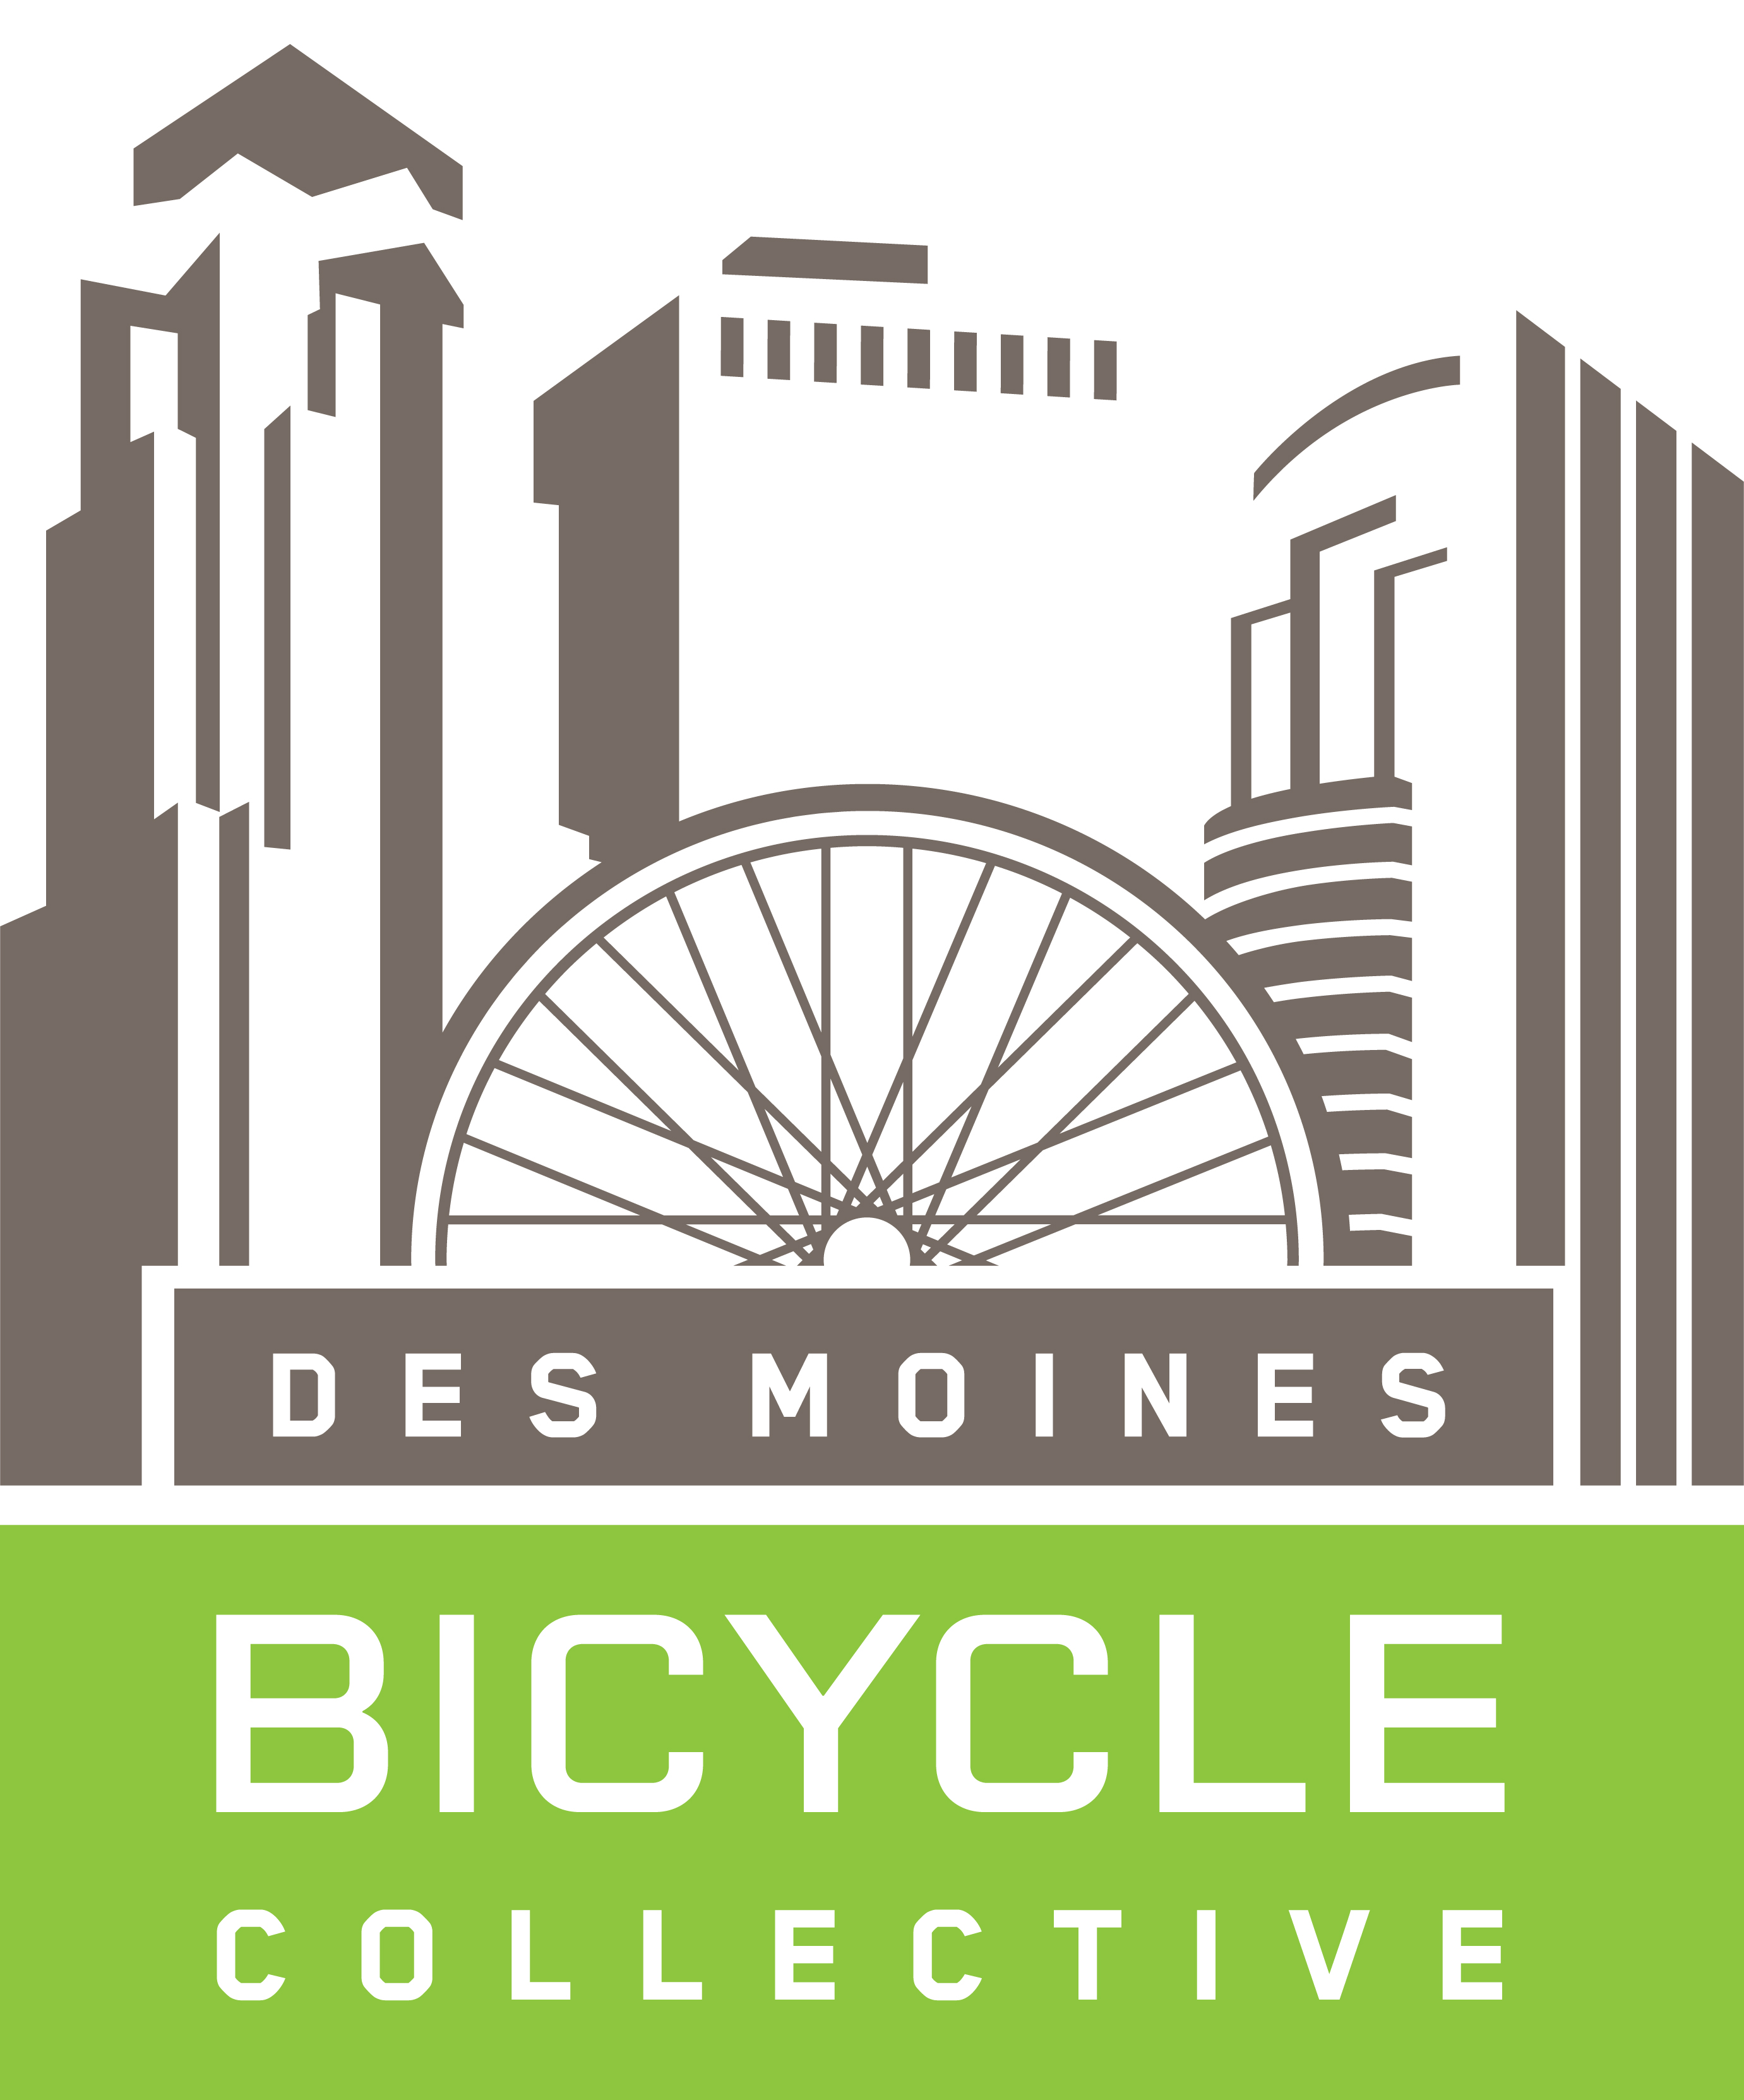 Logo of the Des Moines Bicycle Collective